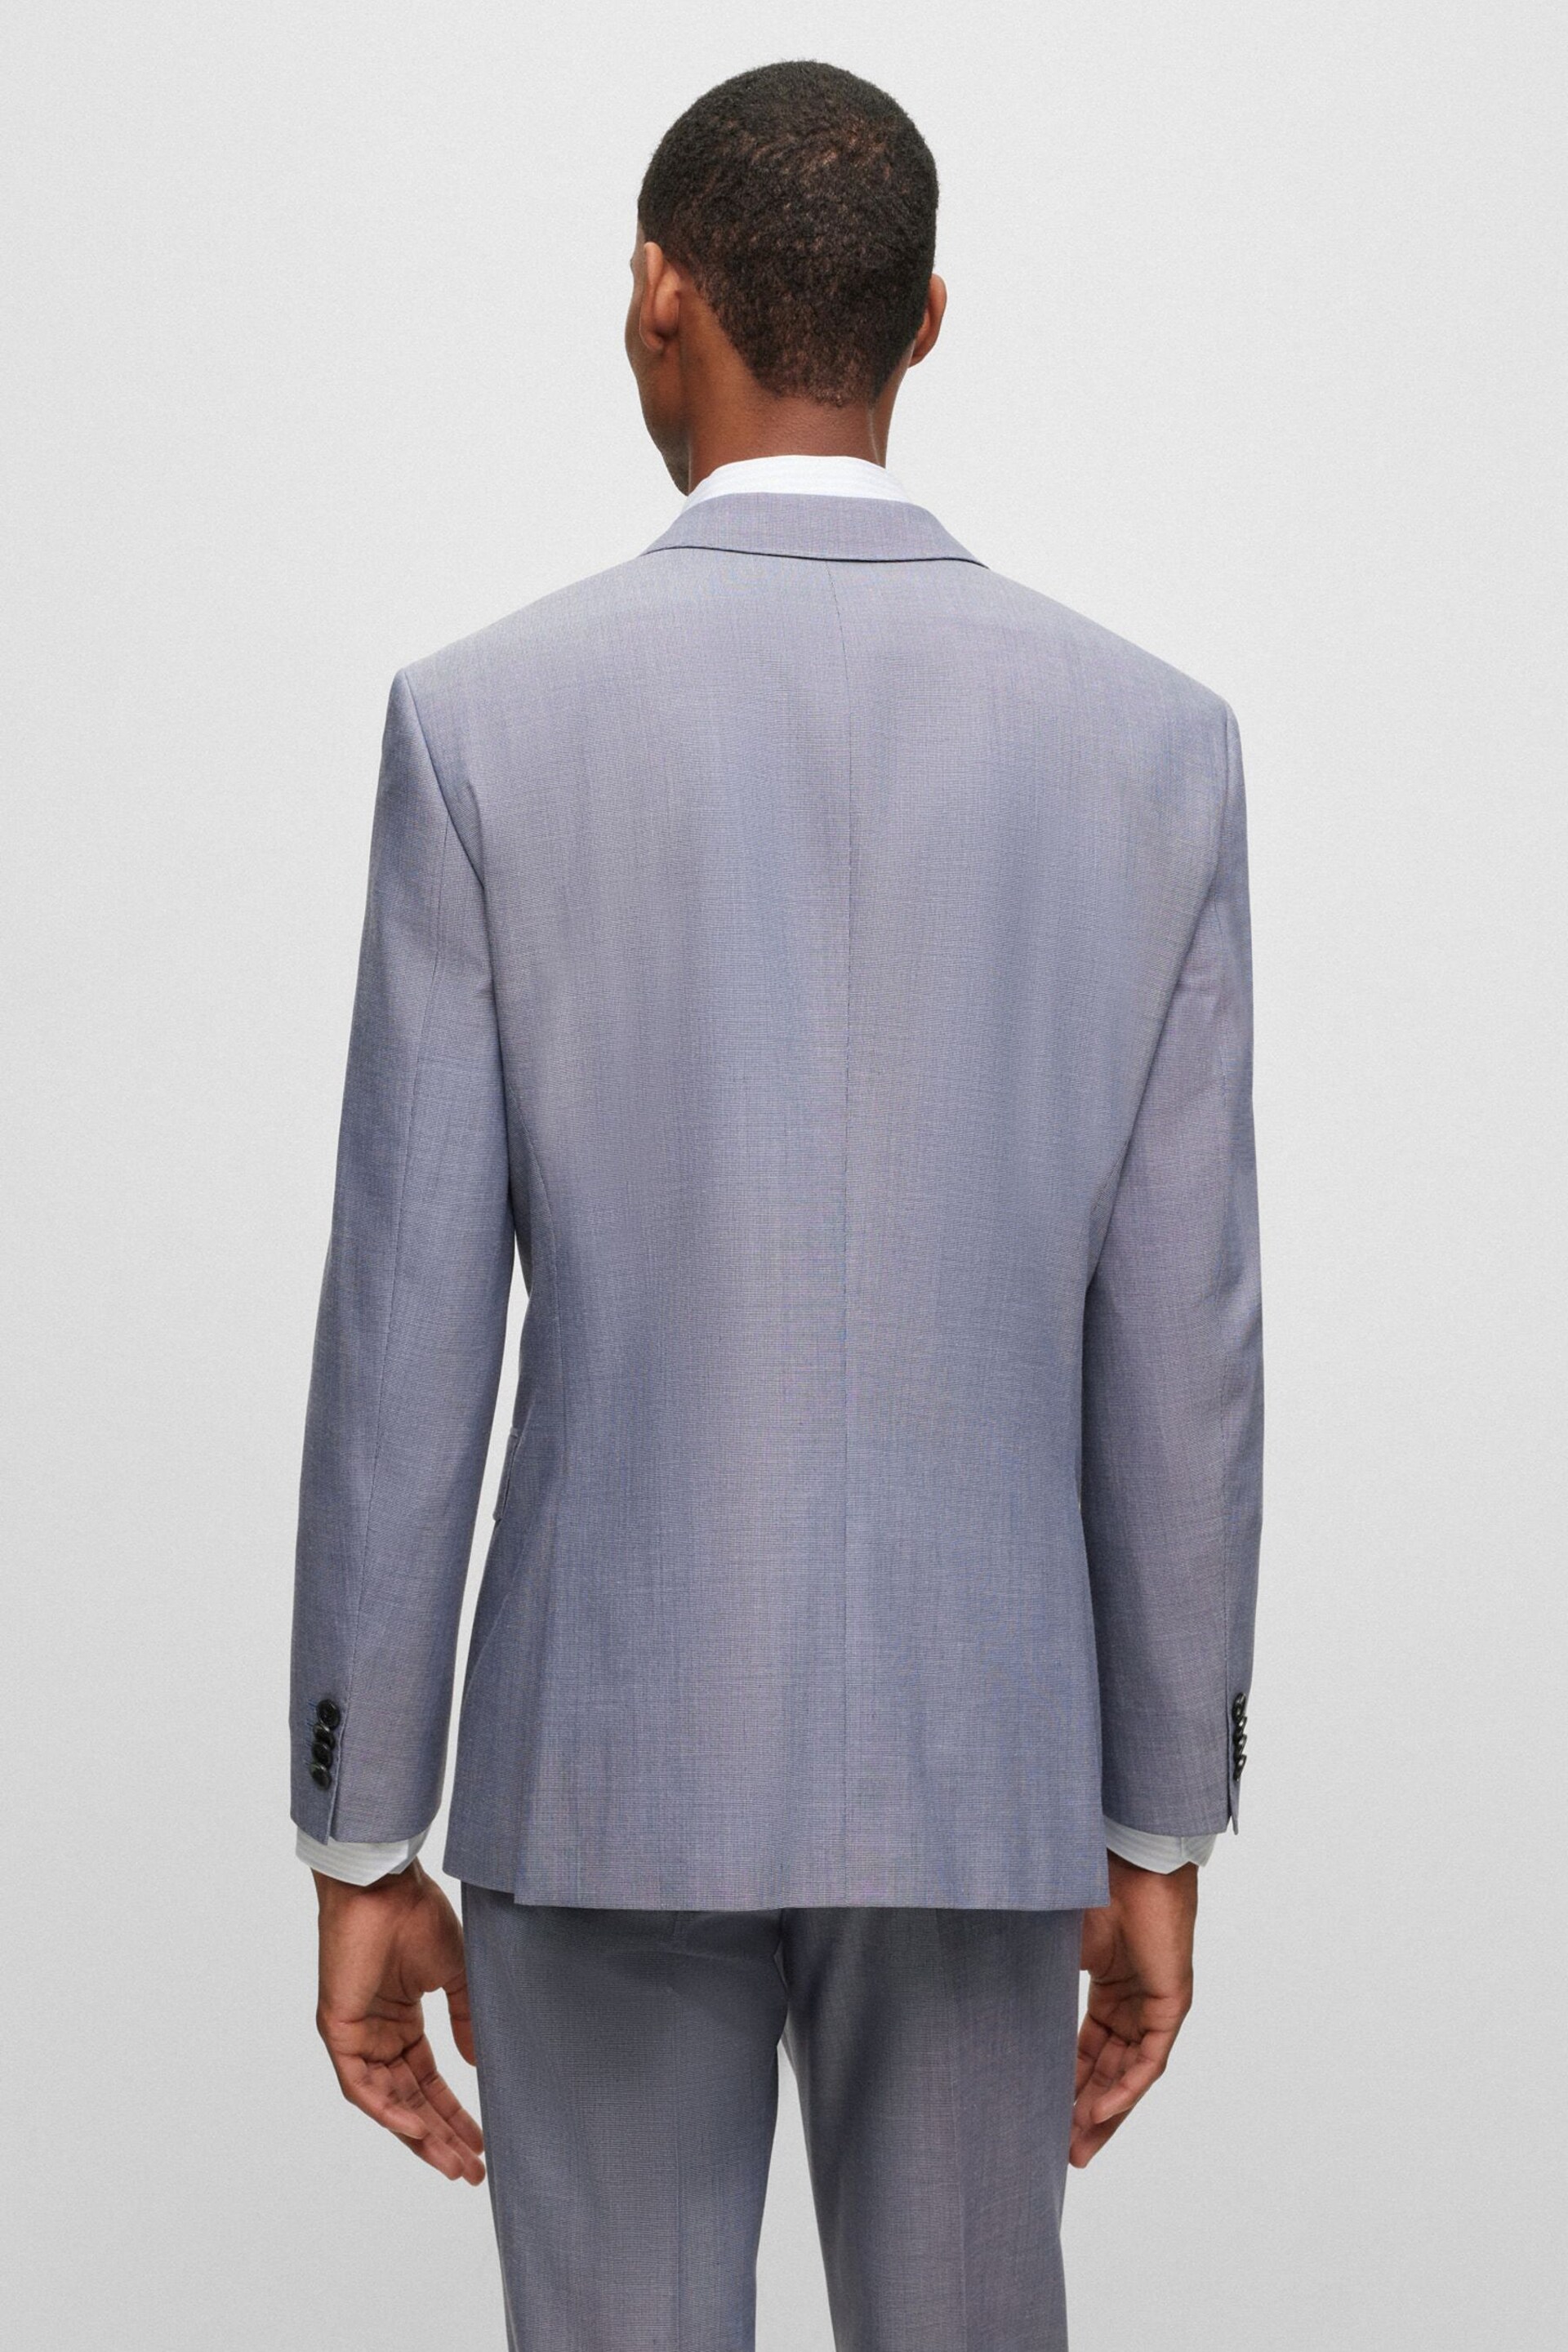 BOSS Blue Micro Patterned Stretch Regular Fit Jacket - Image 3 of 6